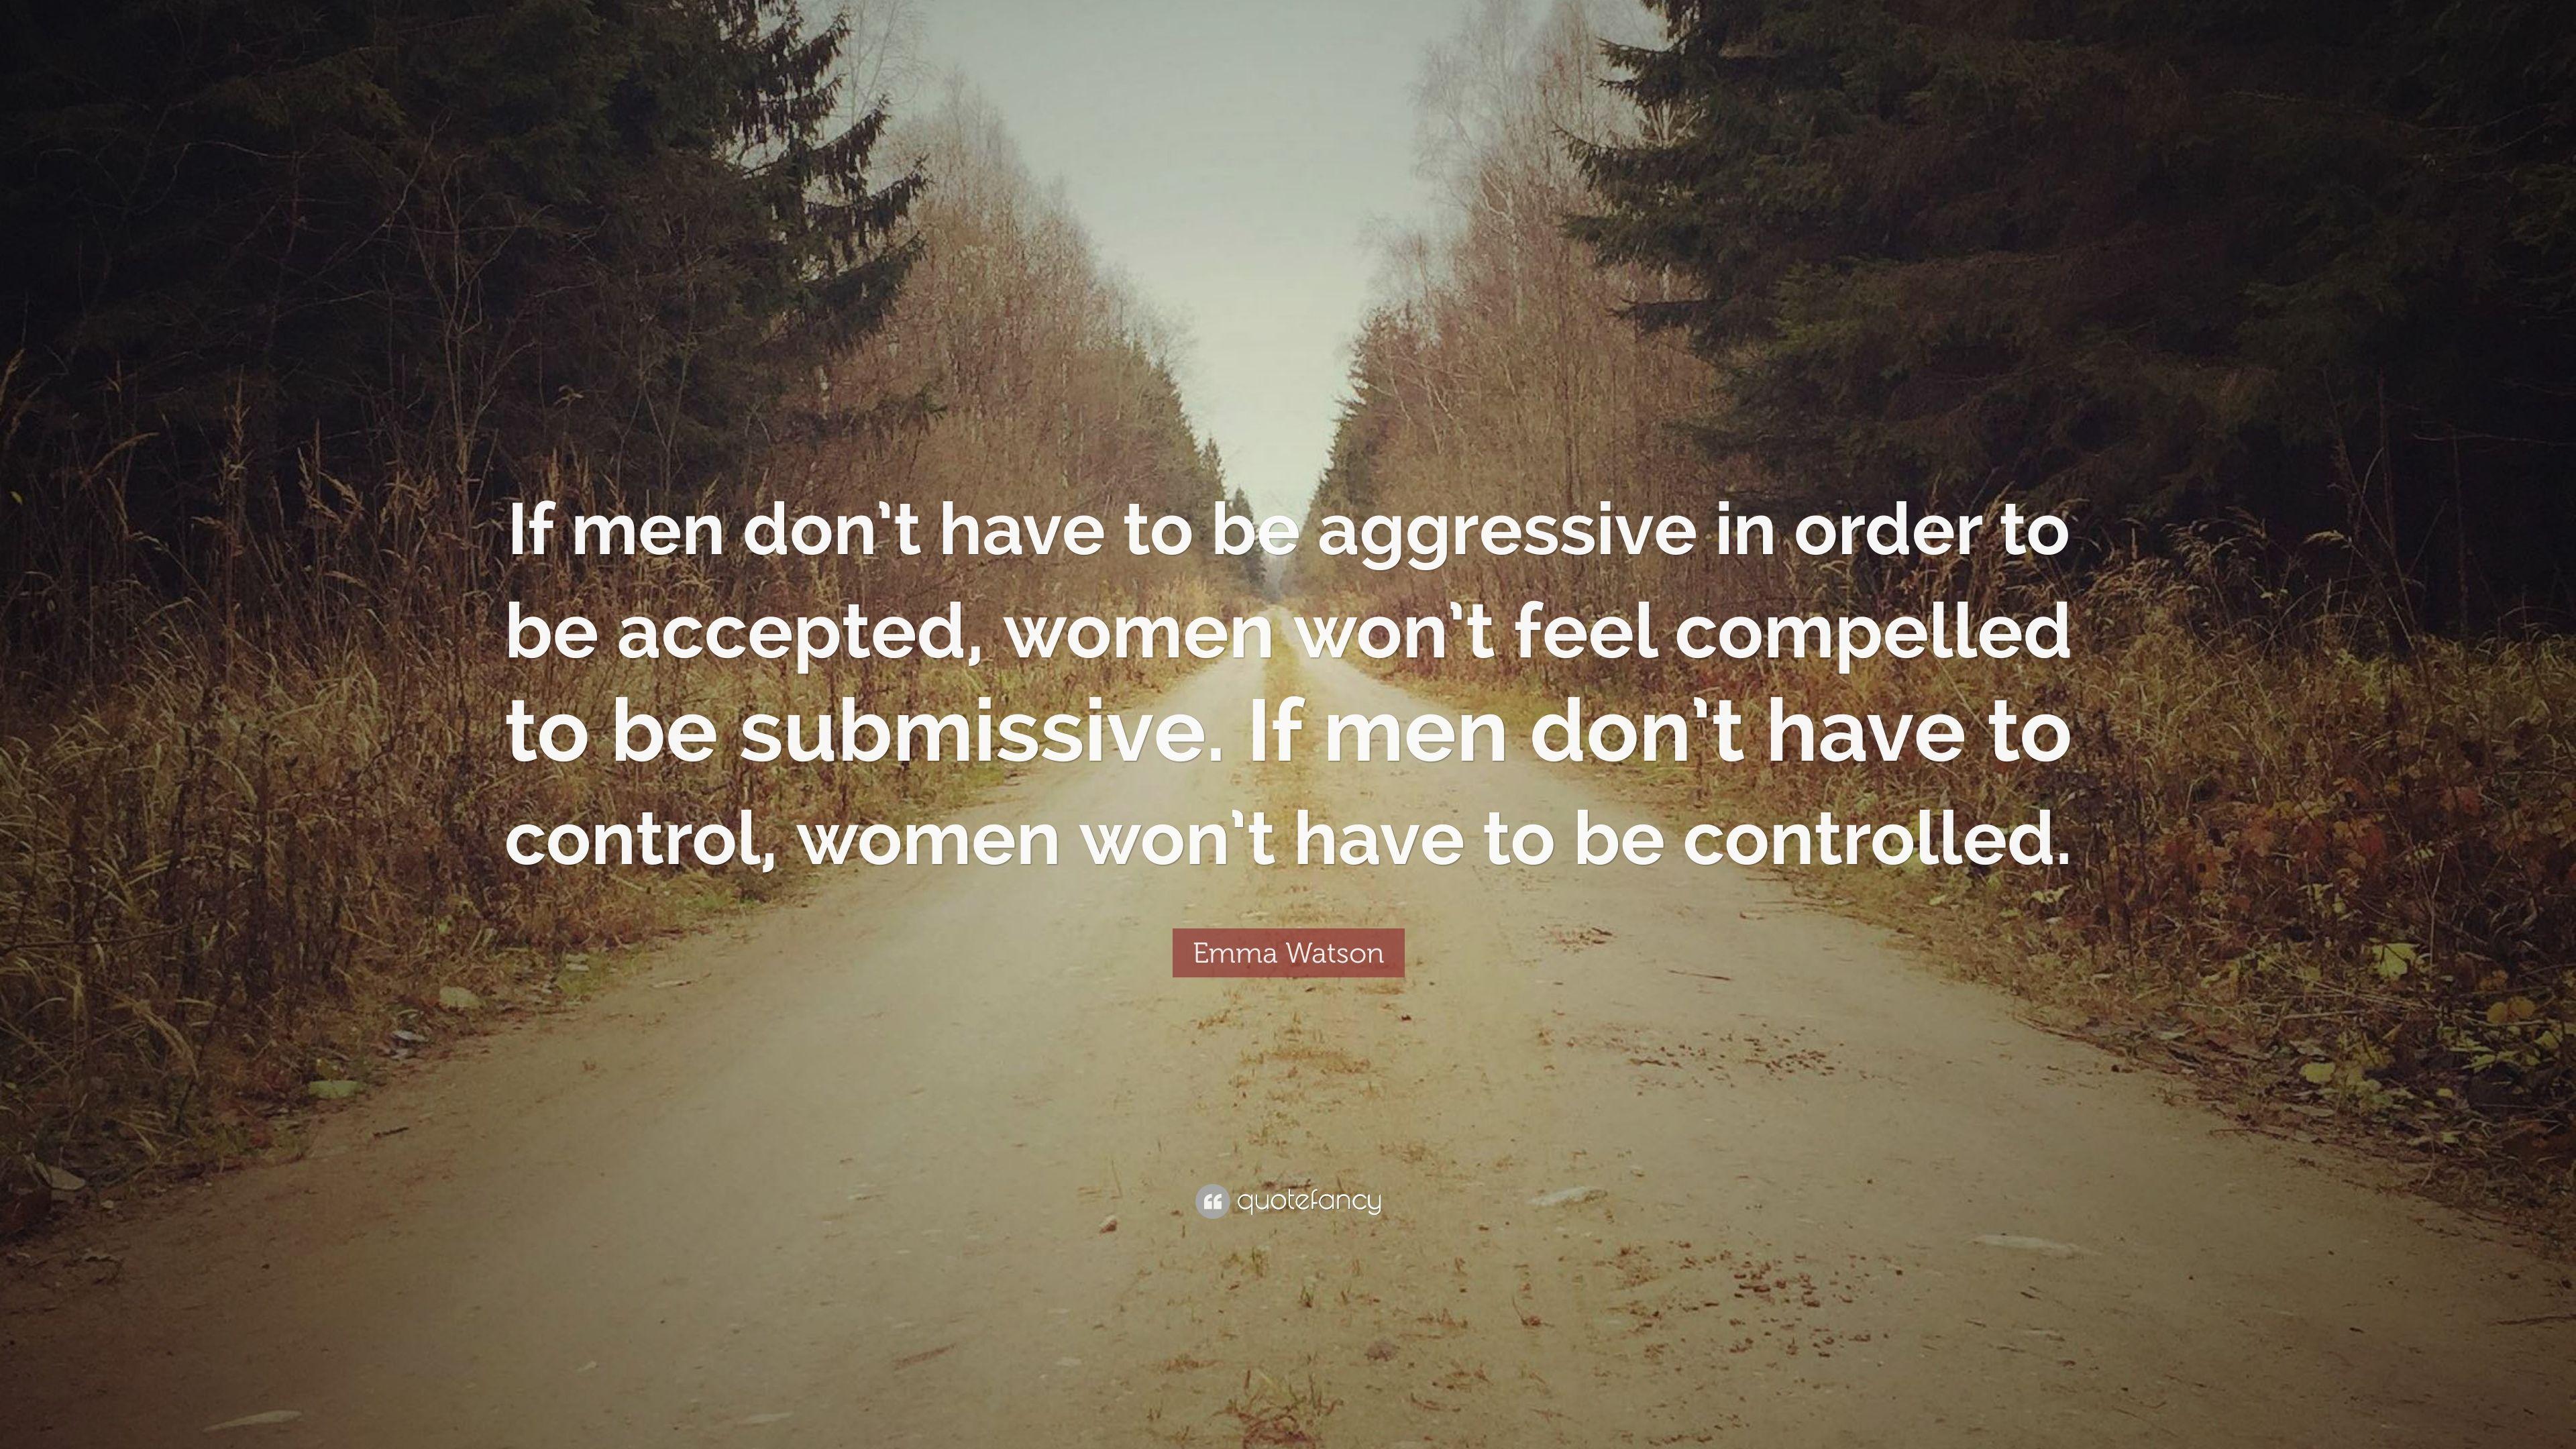 Emma Watson Quote: “If men don't have to be aggressive in order to